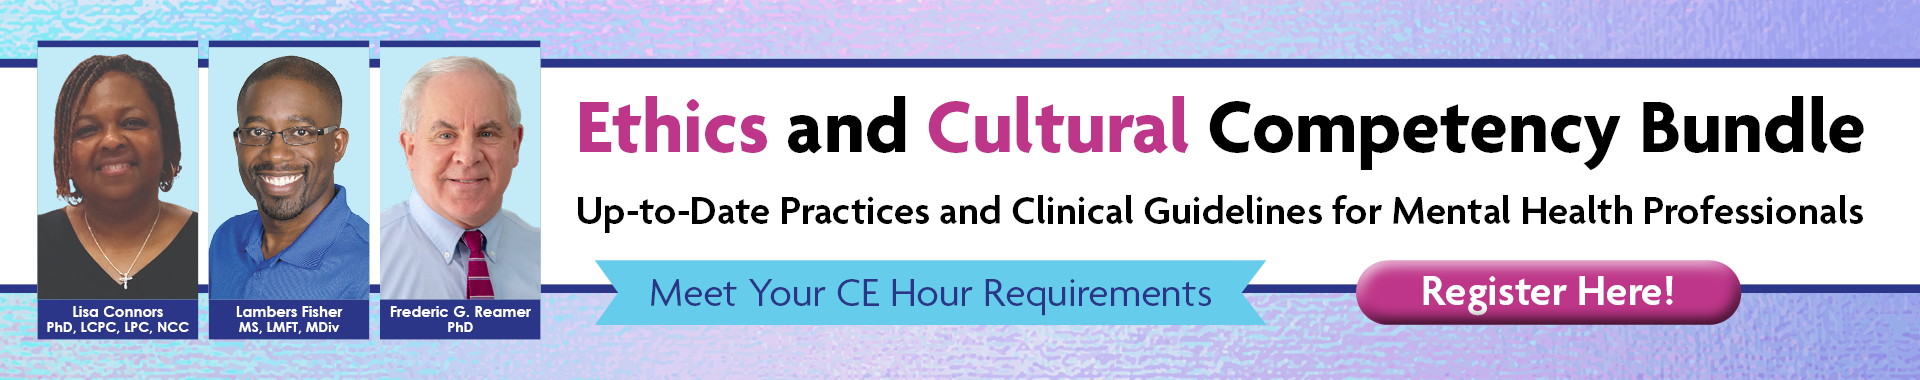 Ethics & Cultural Competency Training Bundle: Up-to-Date Practices and Clinical Guidelines for Mental Health Professionals